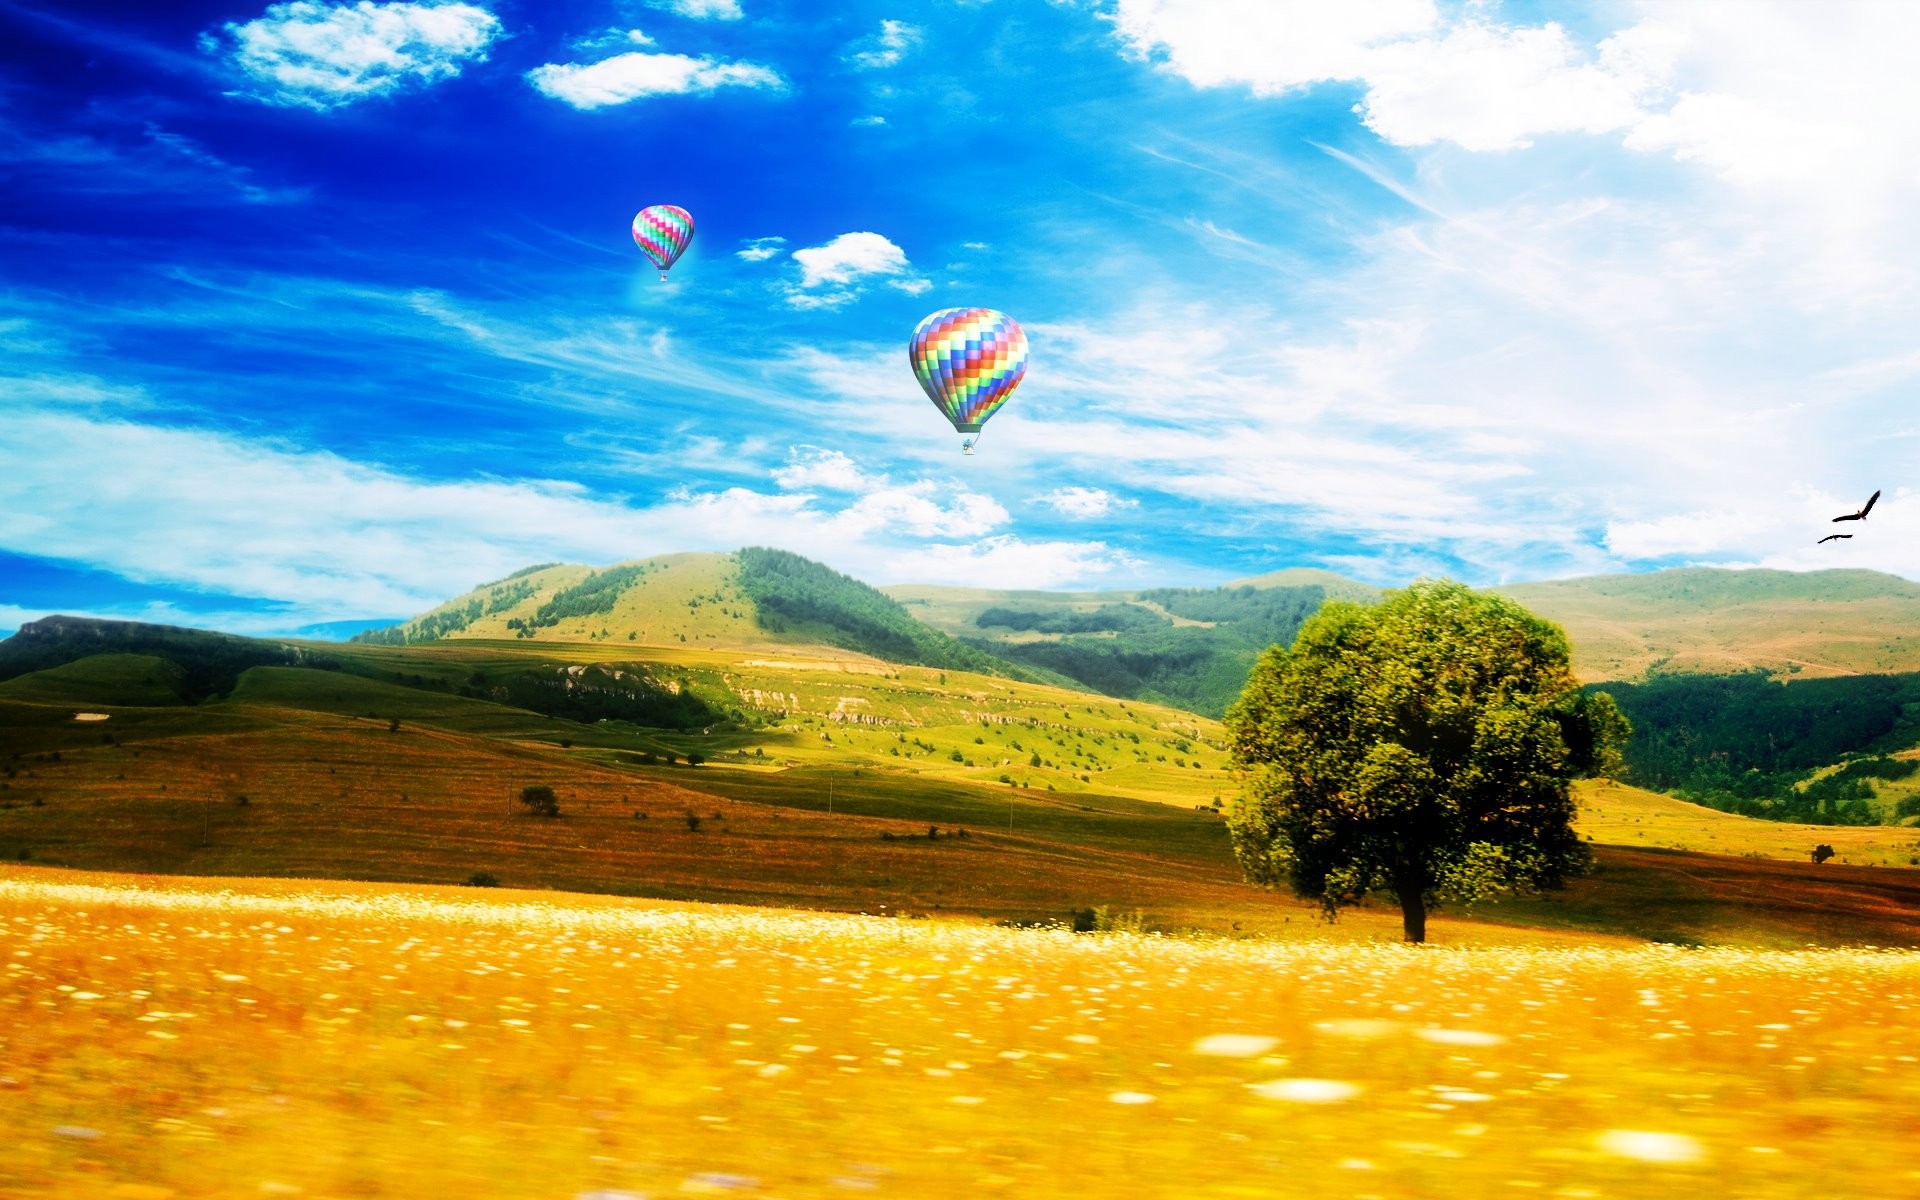 General 1920x1200 landscape sky hot air balloons nature vehicle field